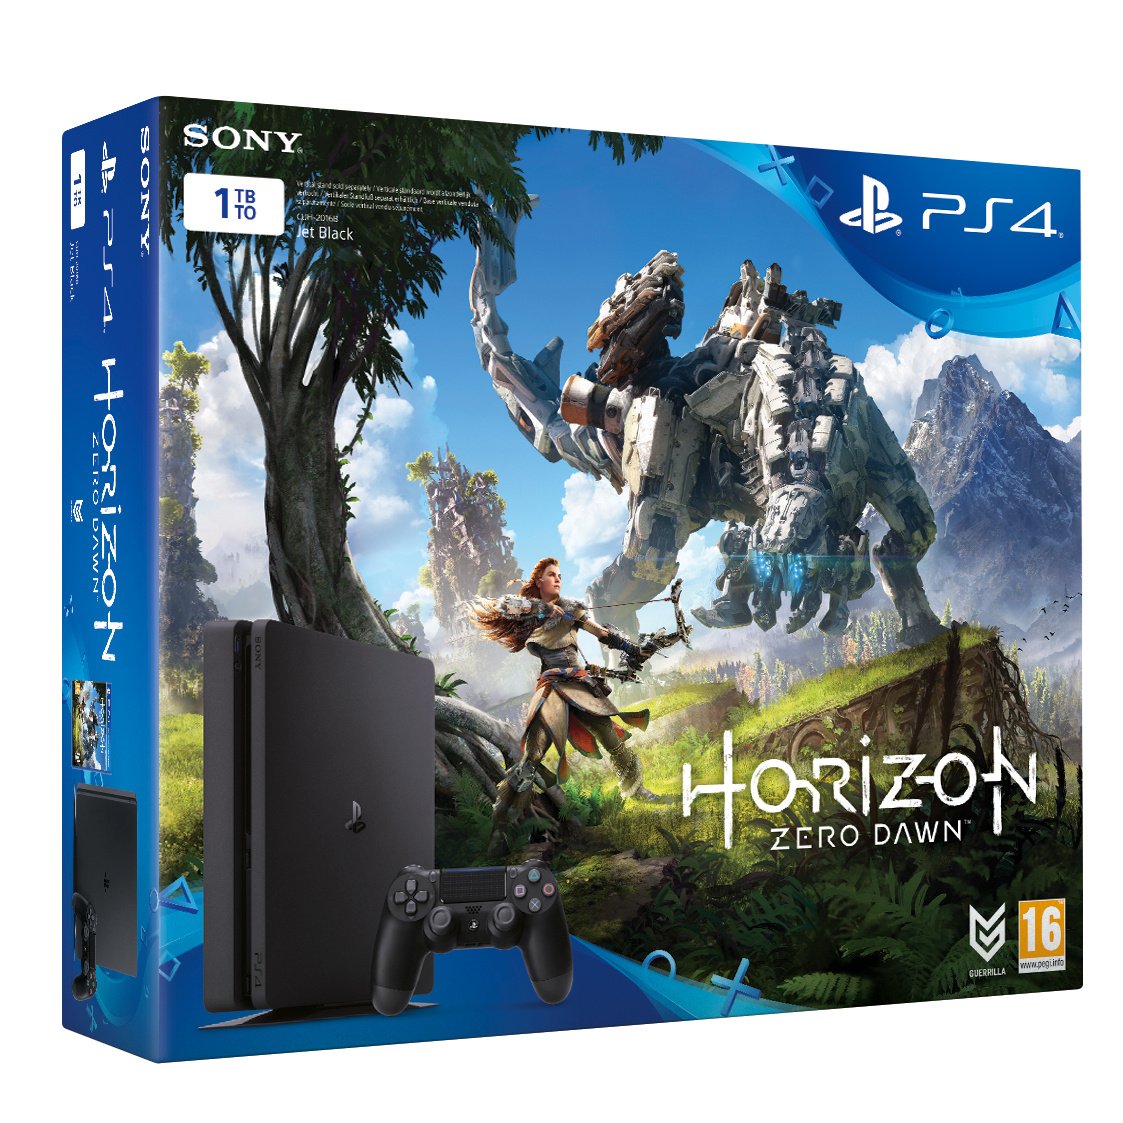 Traded in my Xbox One for a PS4 Pro and Horizon: Zero Dawn. No